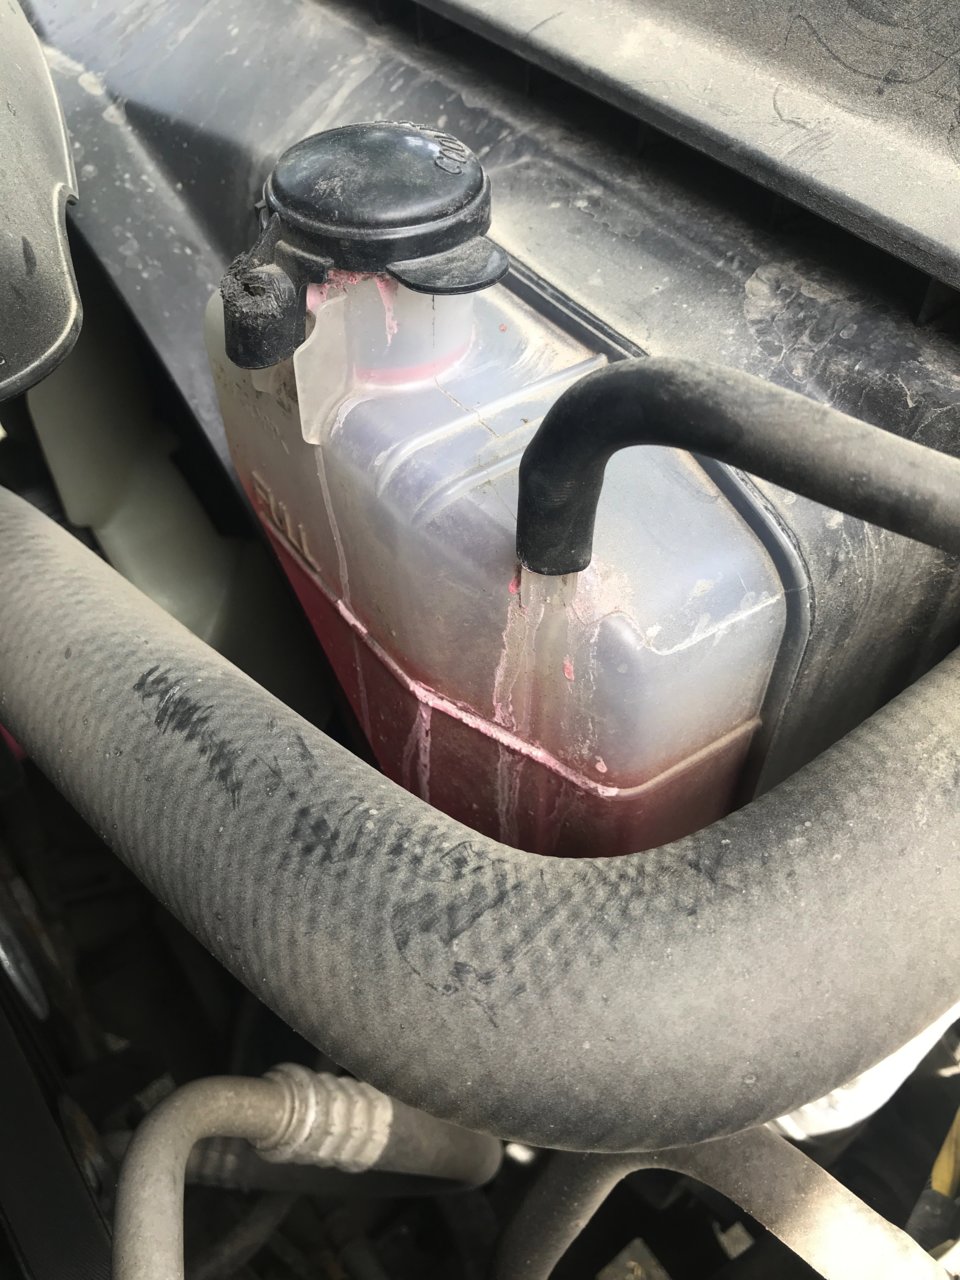 Coolant coming out of reservoir